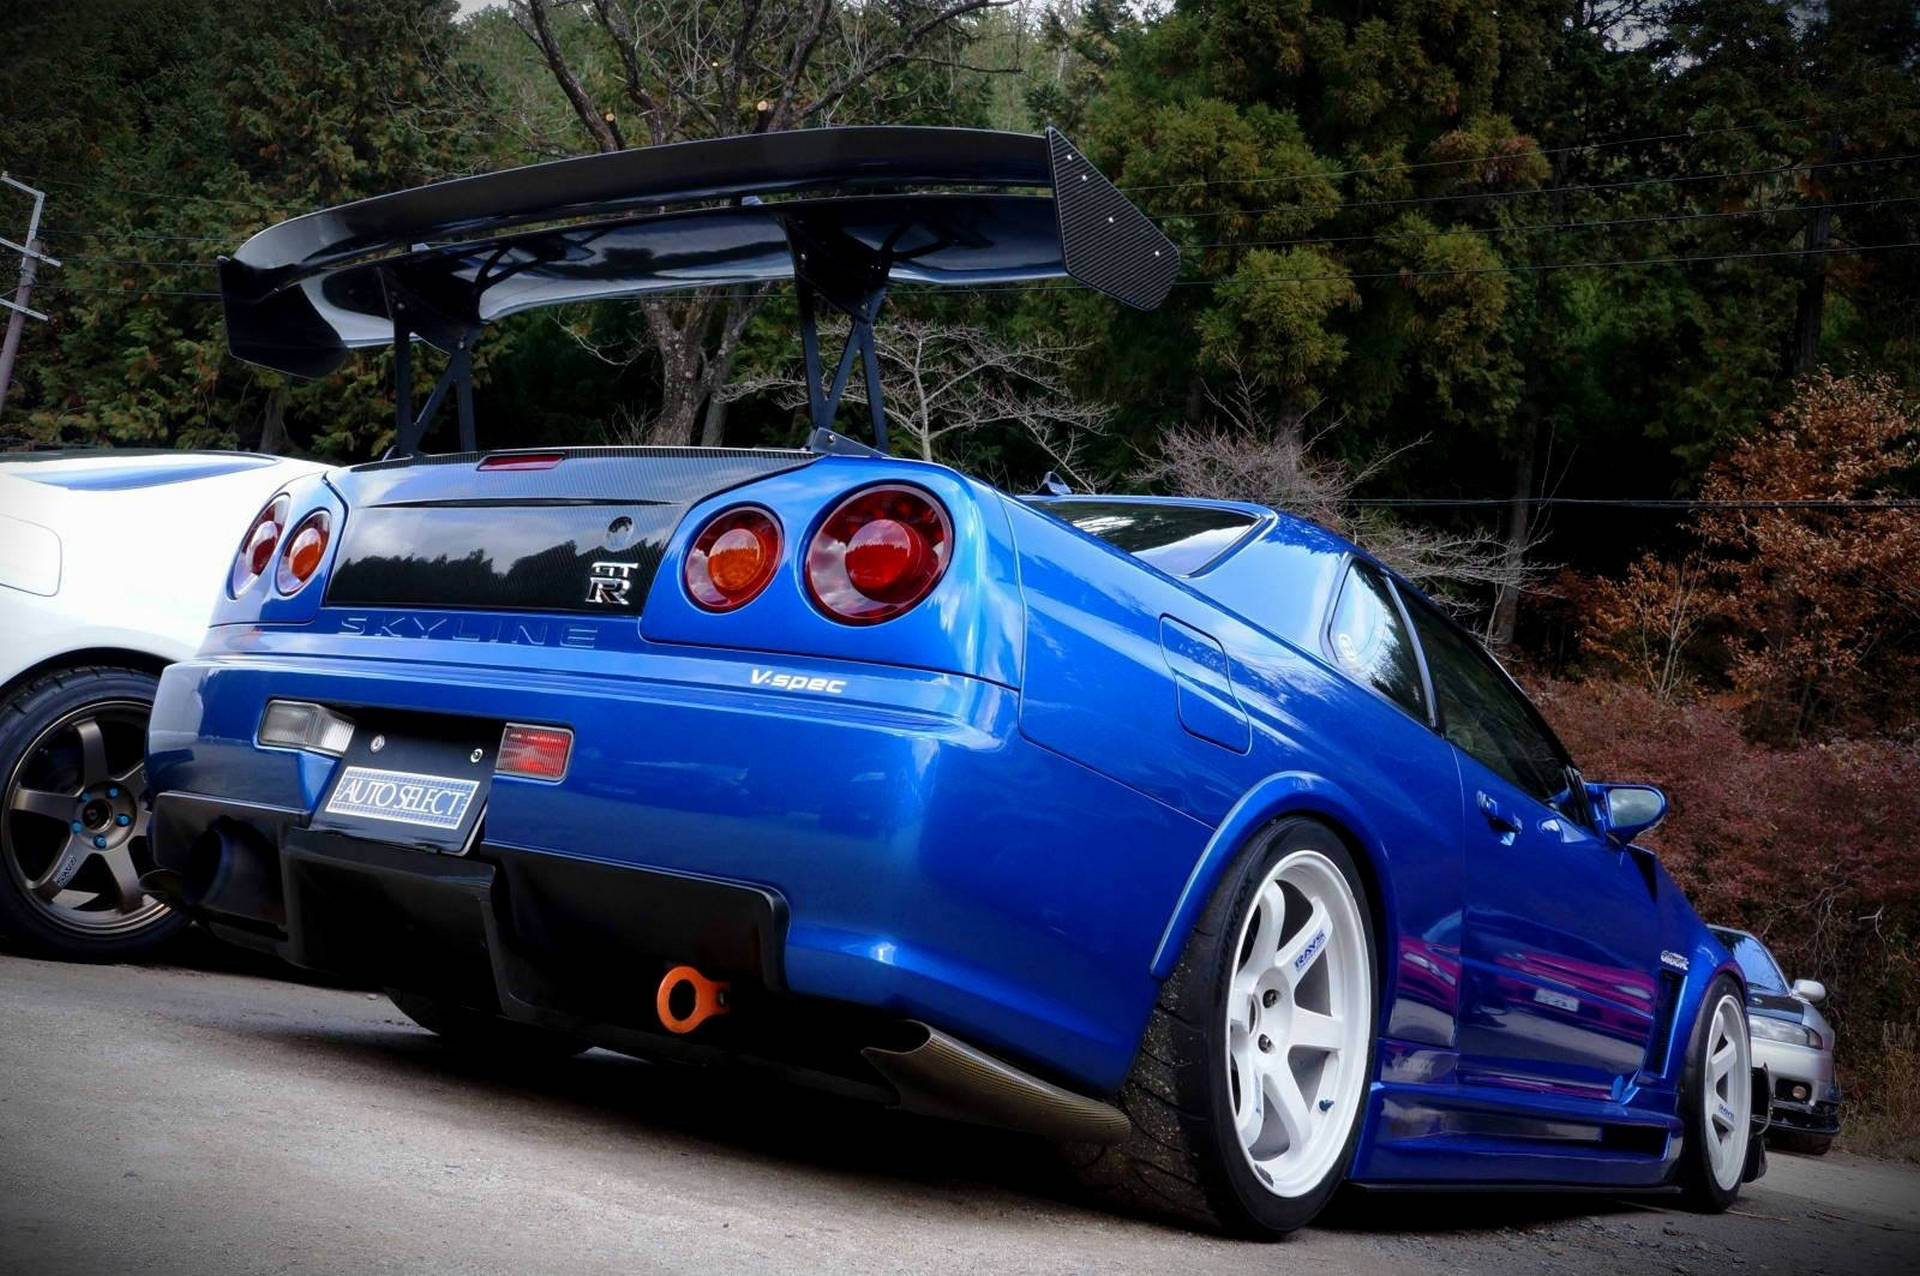 Majestic Shot Of A Nissan Skyline Gtr R34 In High-definition. Background